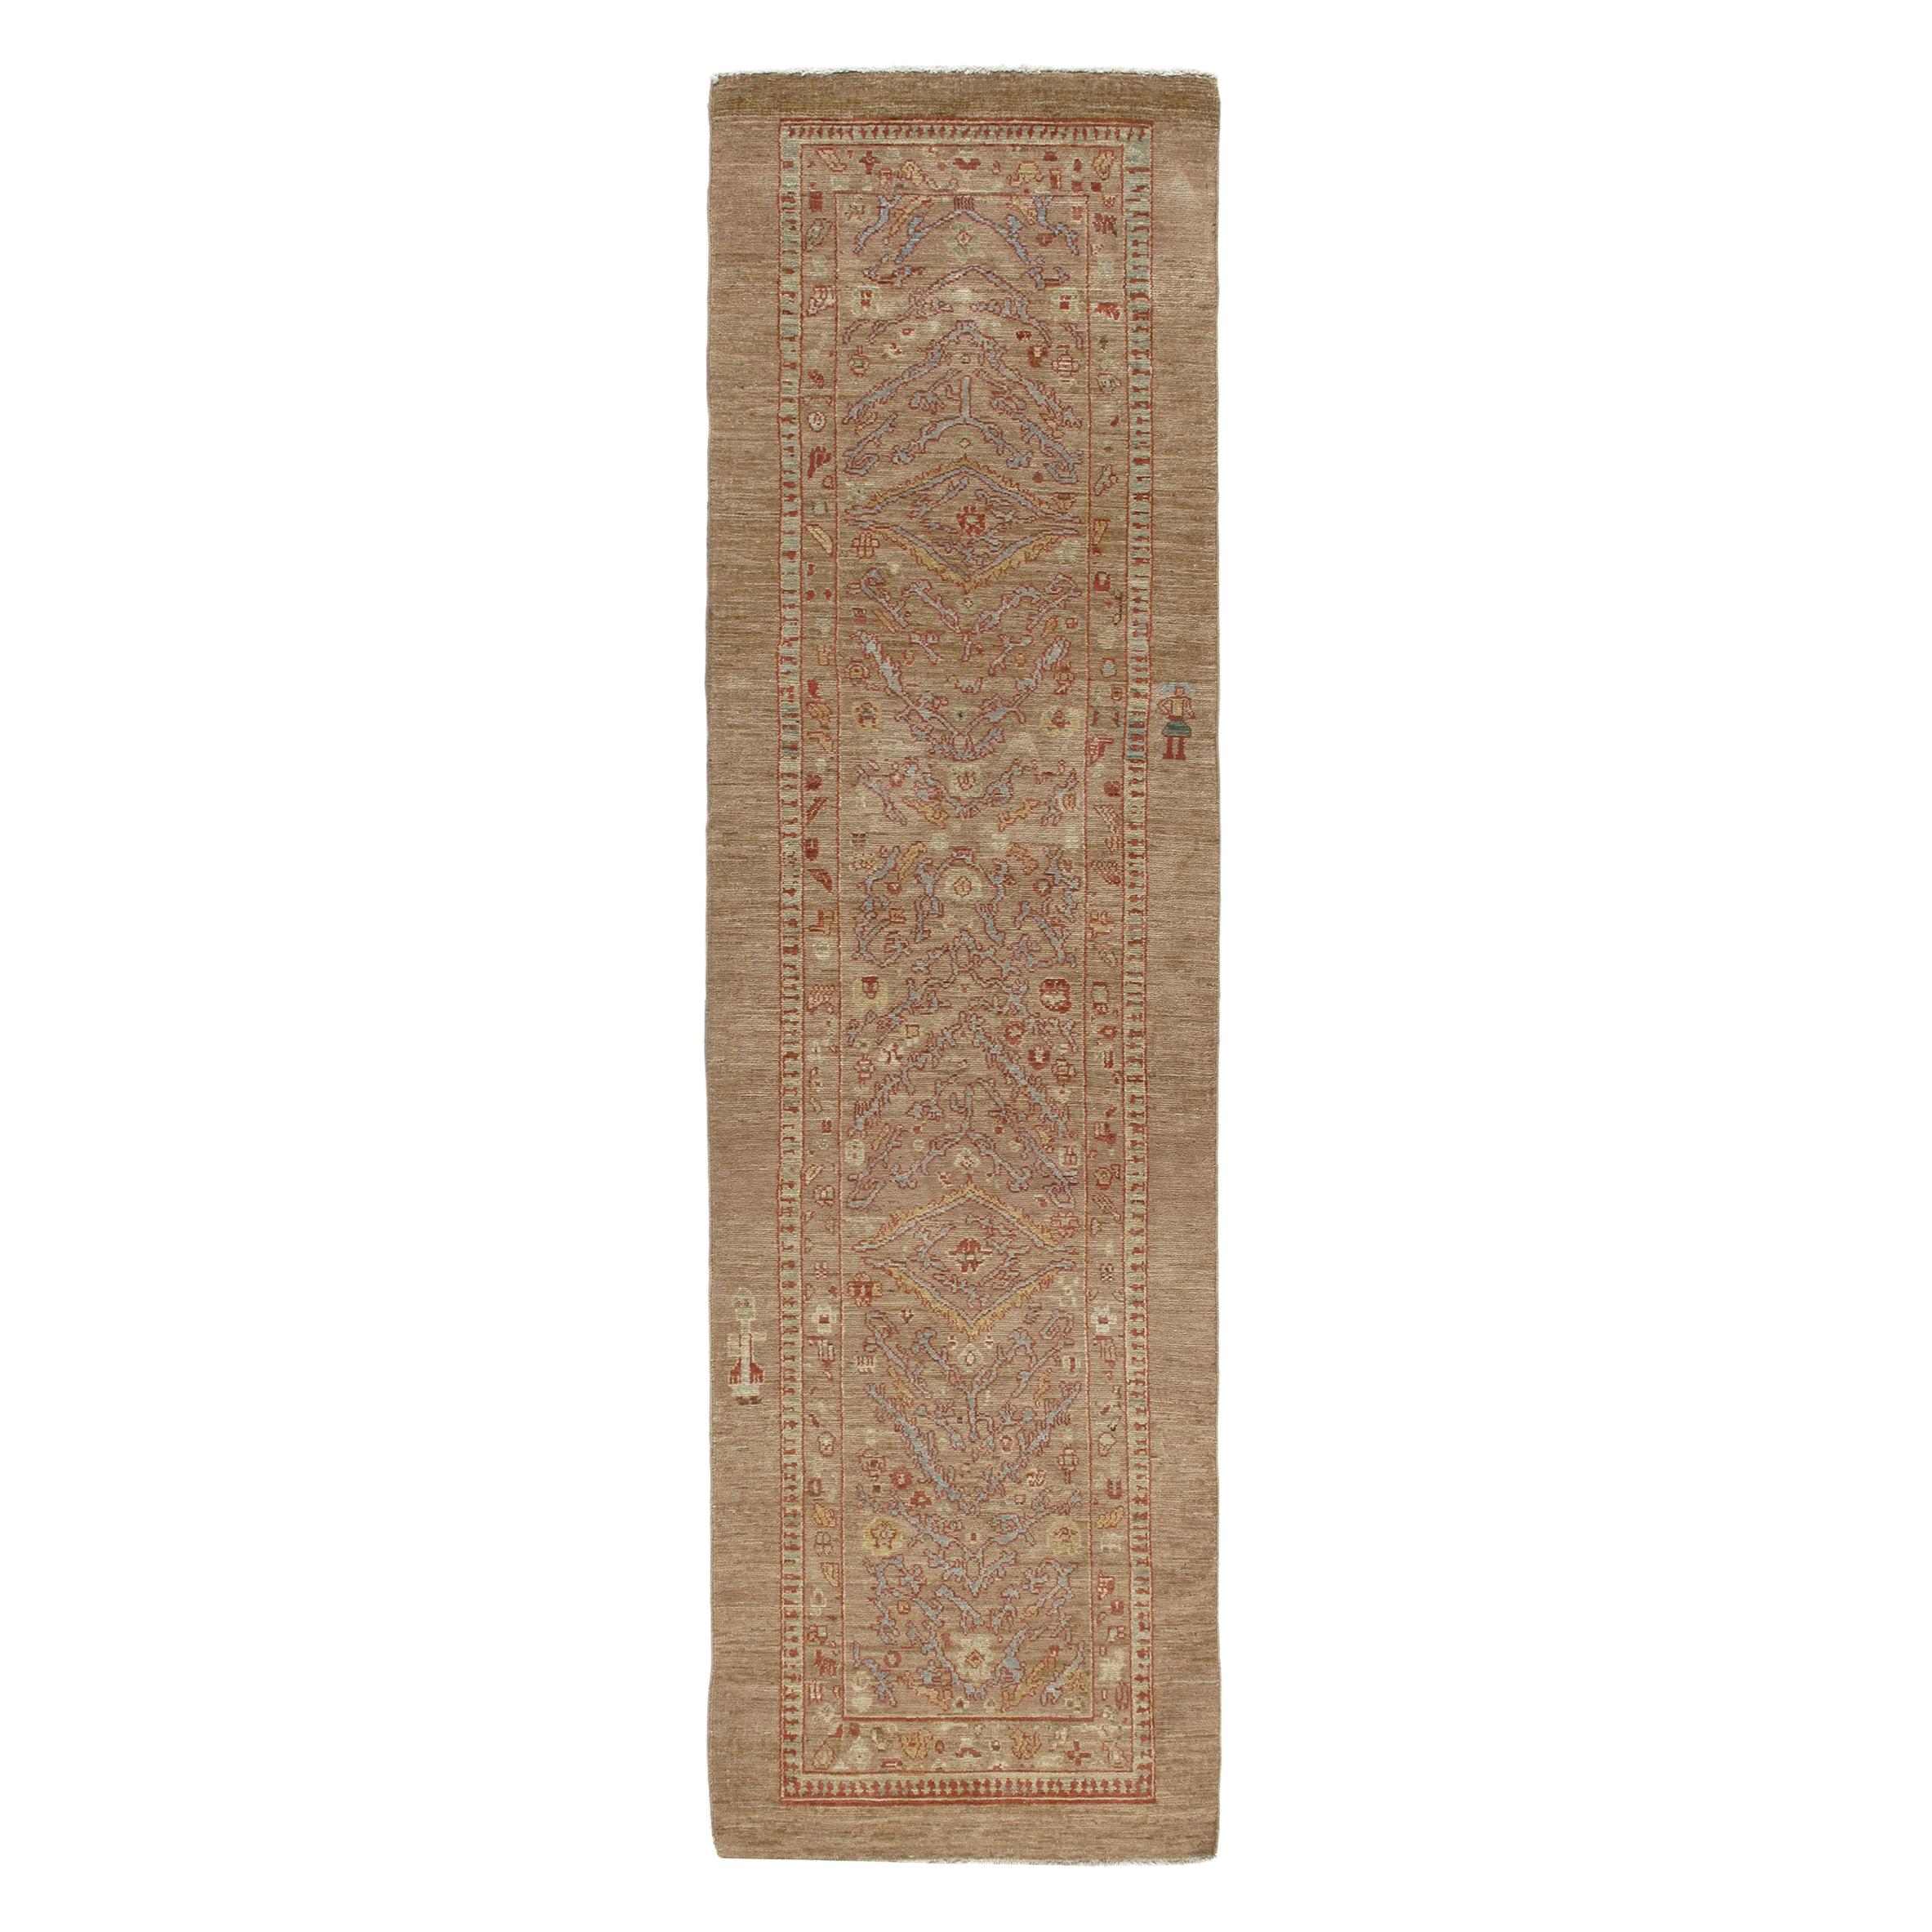 Persian Traditional Kurdish Hand Knotted Runner Rug in Camel, and Rust Color